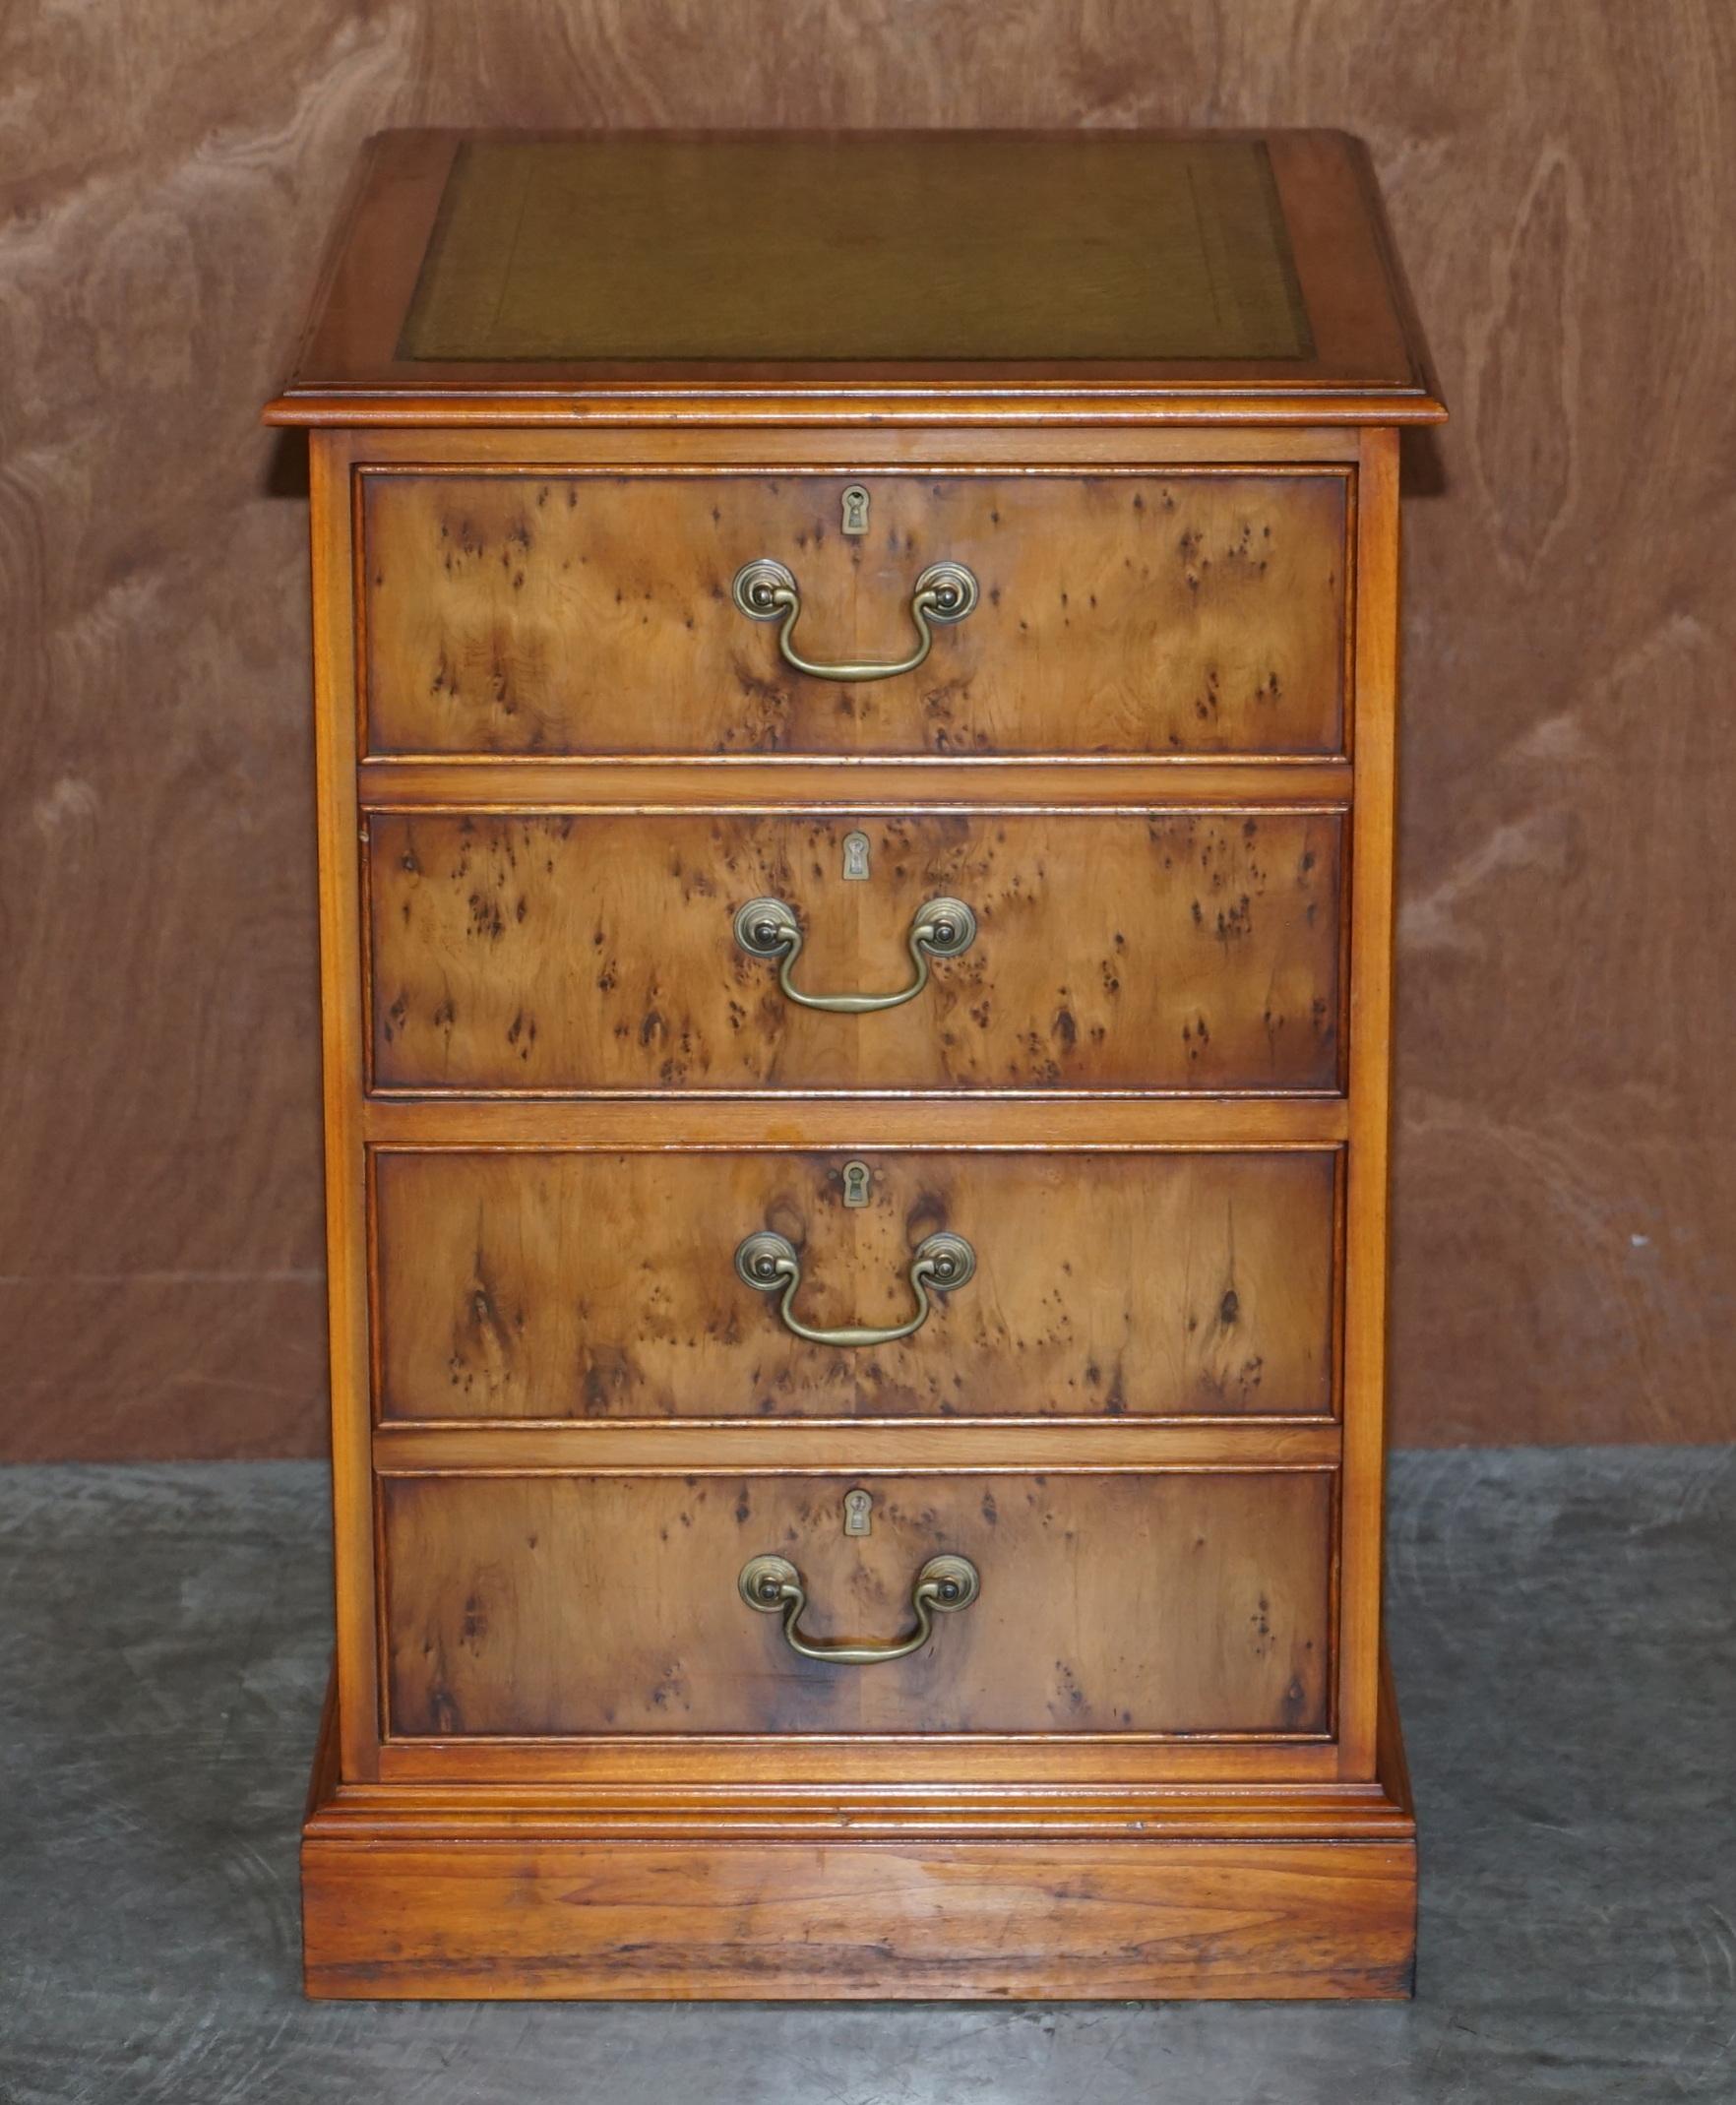 We are delighted to offer for sale this lovely burr yew wood filing cabinet with gold leaf embossed green leather top

A truly stunning piece, if burr yew is your thing or just timber patina that to die for then look no further, this cabinet is